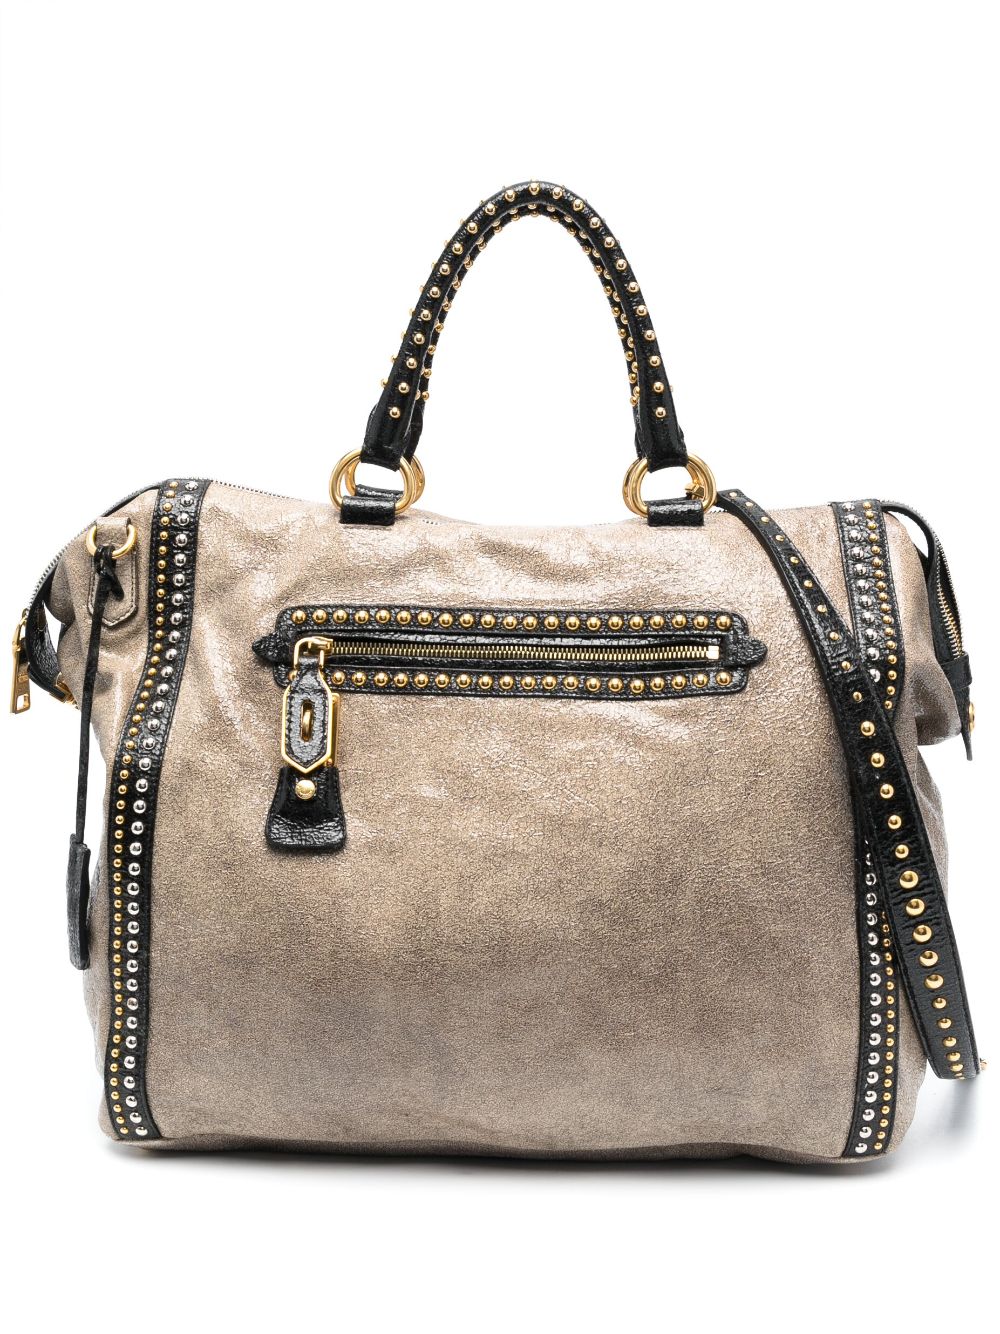 Prada Pre-Owned 2010s stud-embellished zipped two-way bag - Neutrals von Prada Pre-Owned